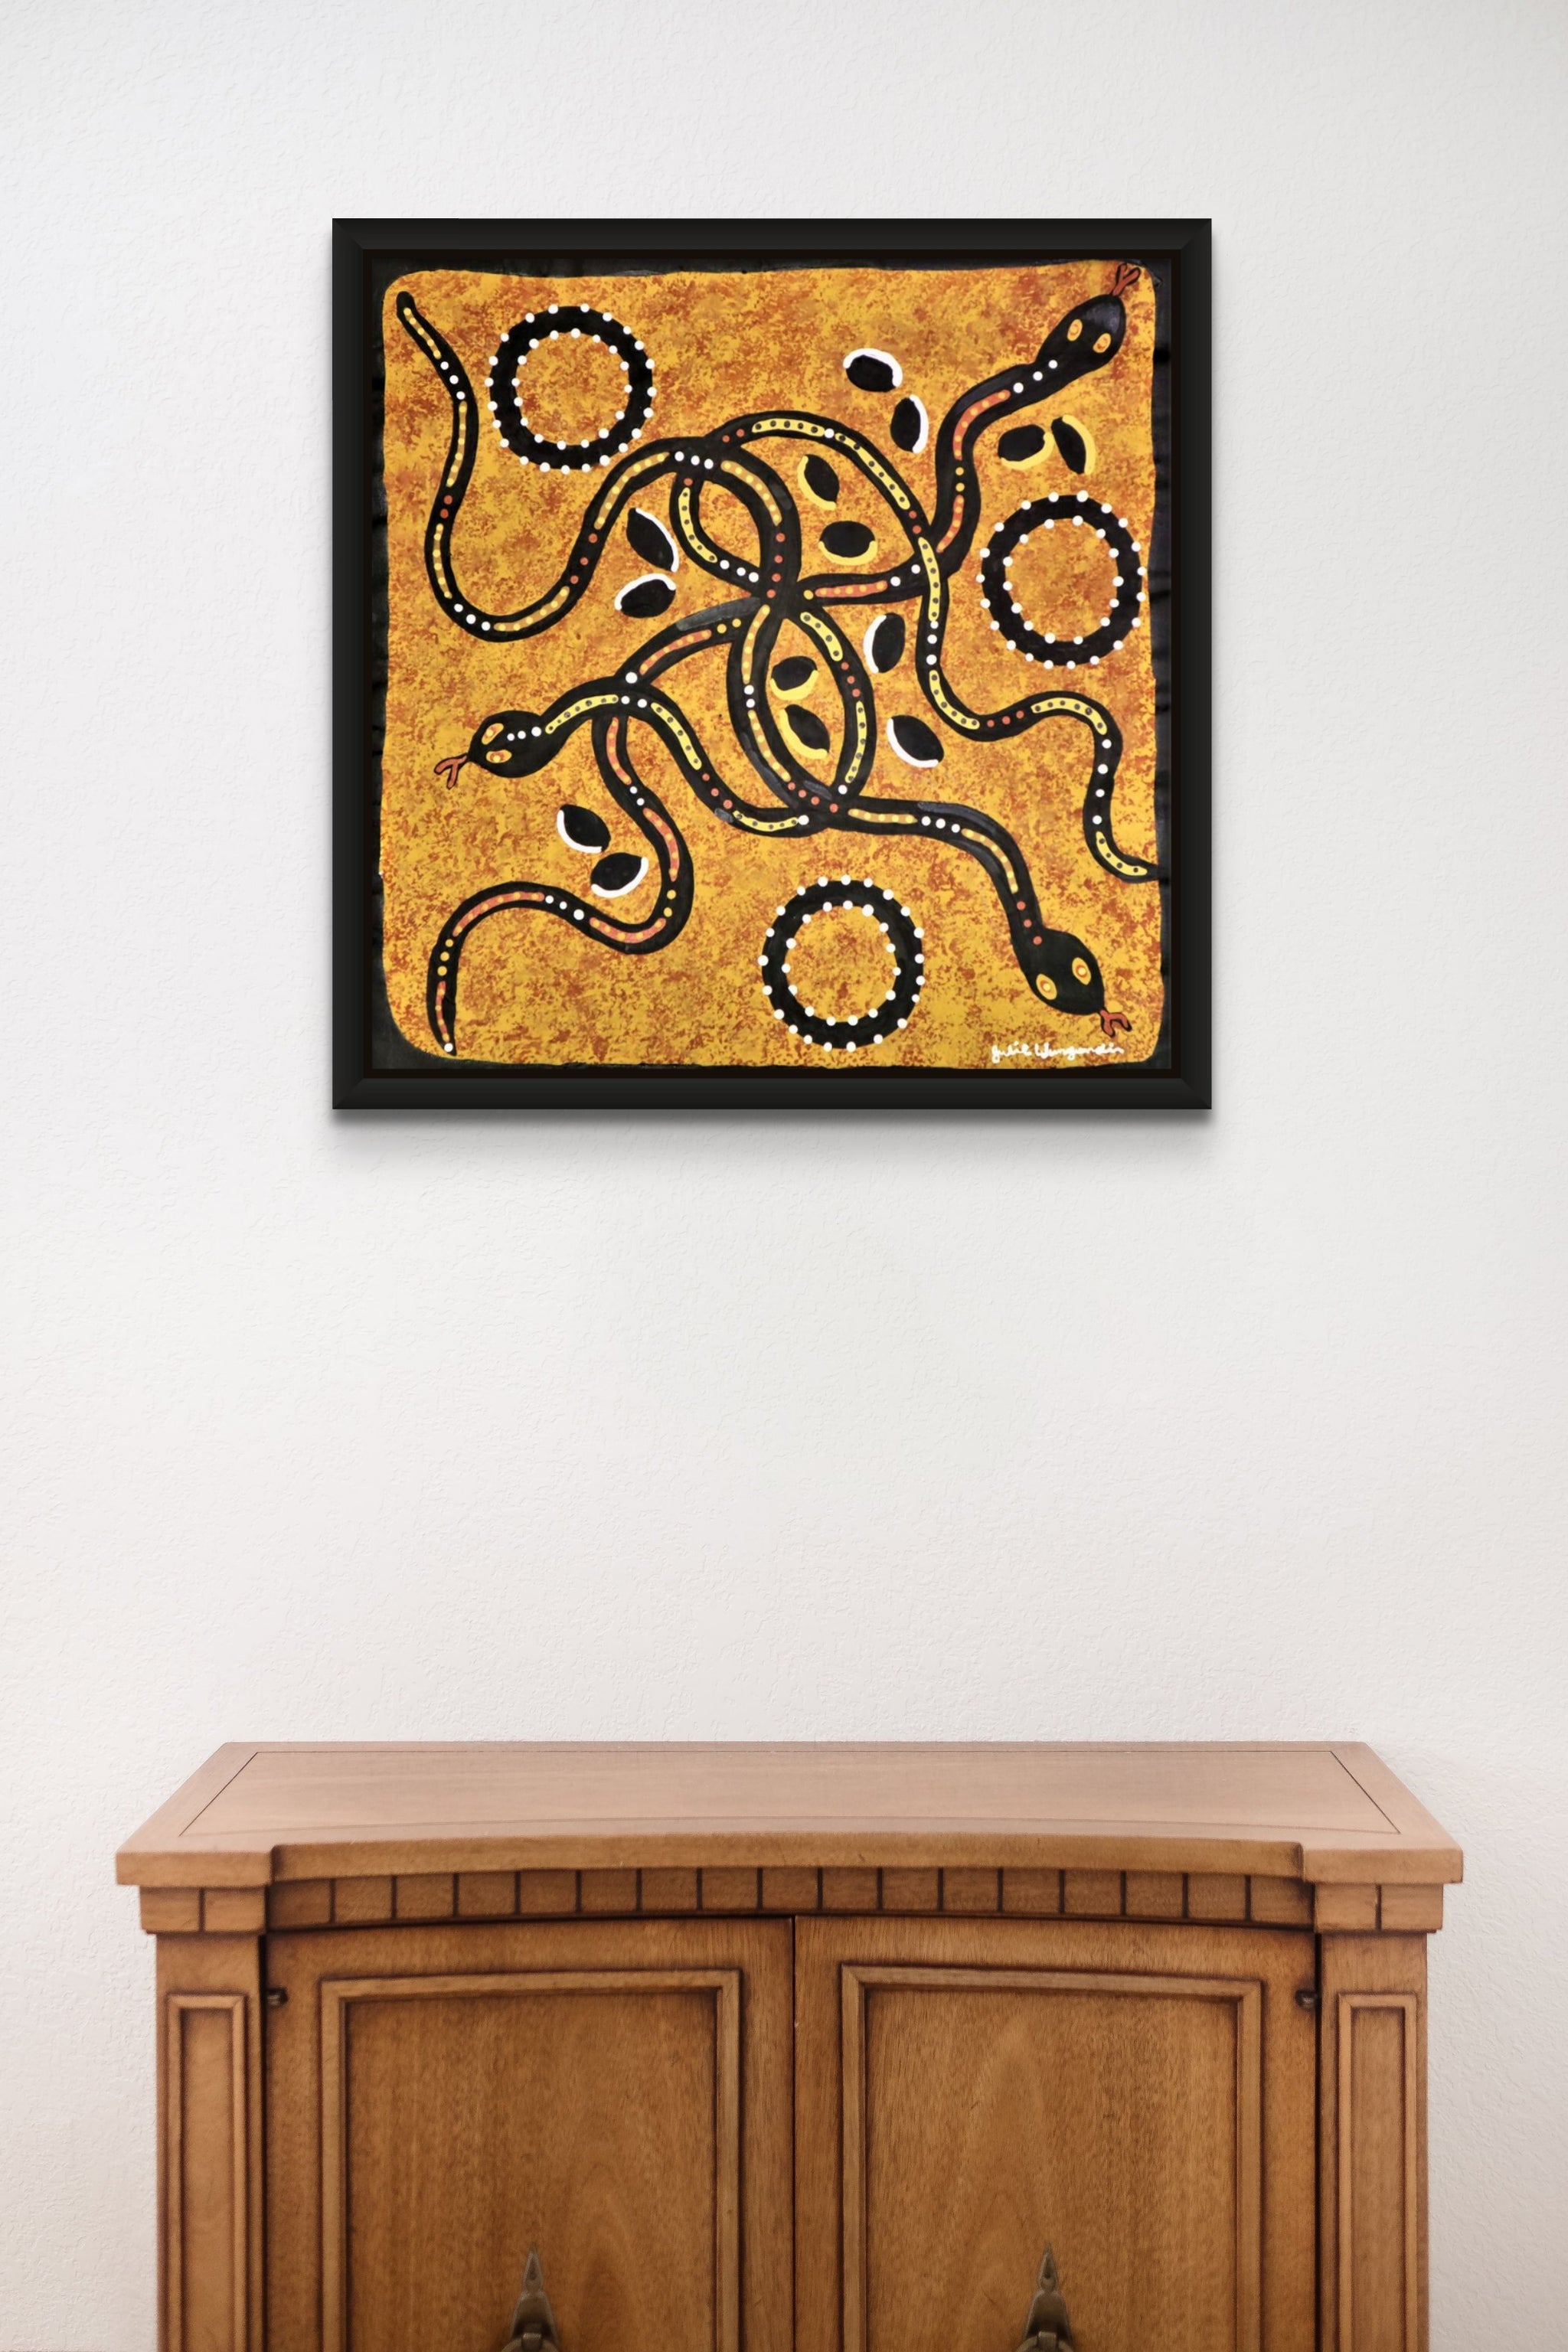 " Three Ungud (Dreamtime Snake) Fighting Over Sacred Waterholes and Eggs" by Julie Wungundin